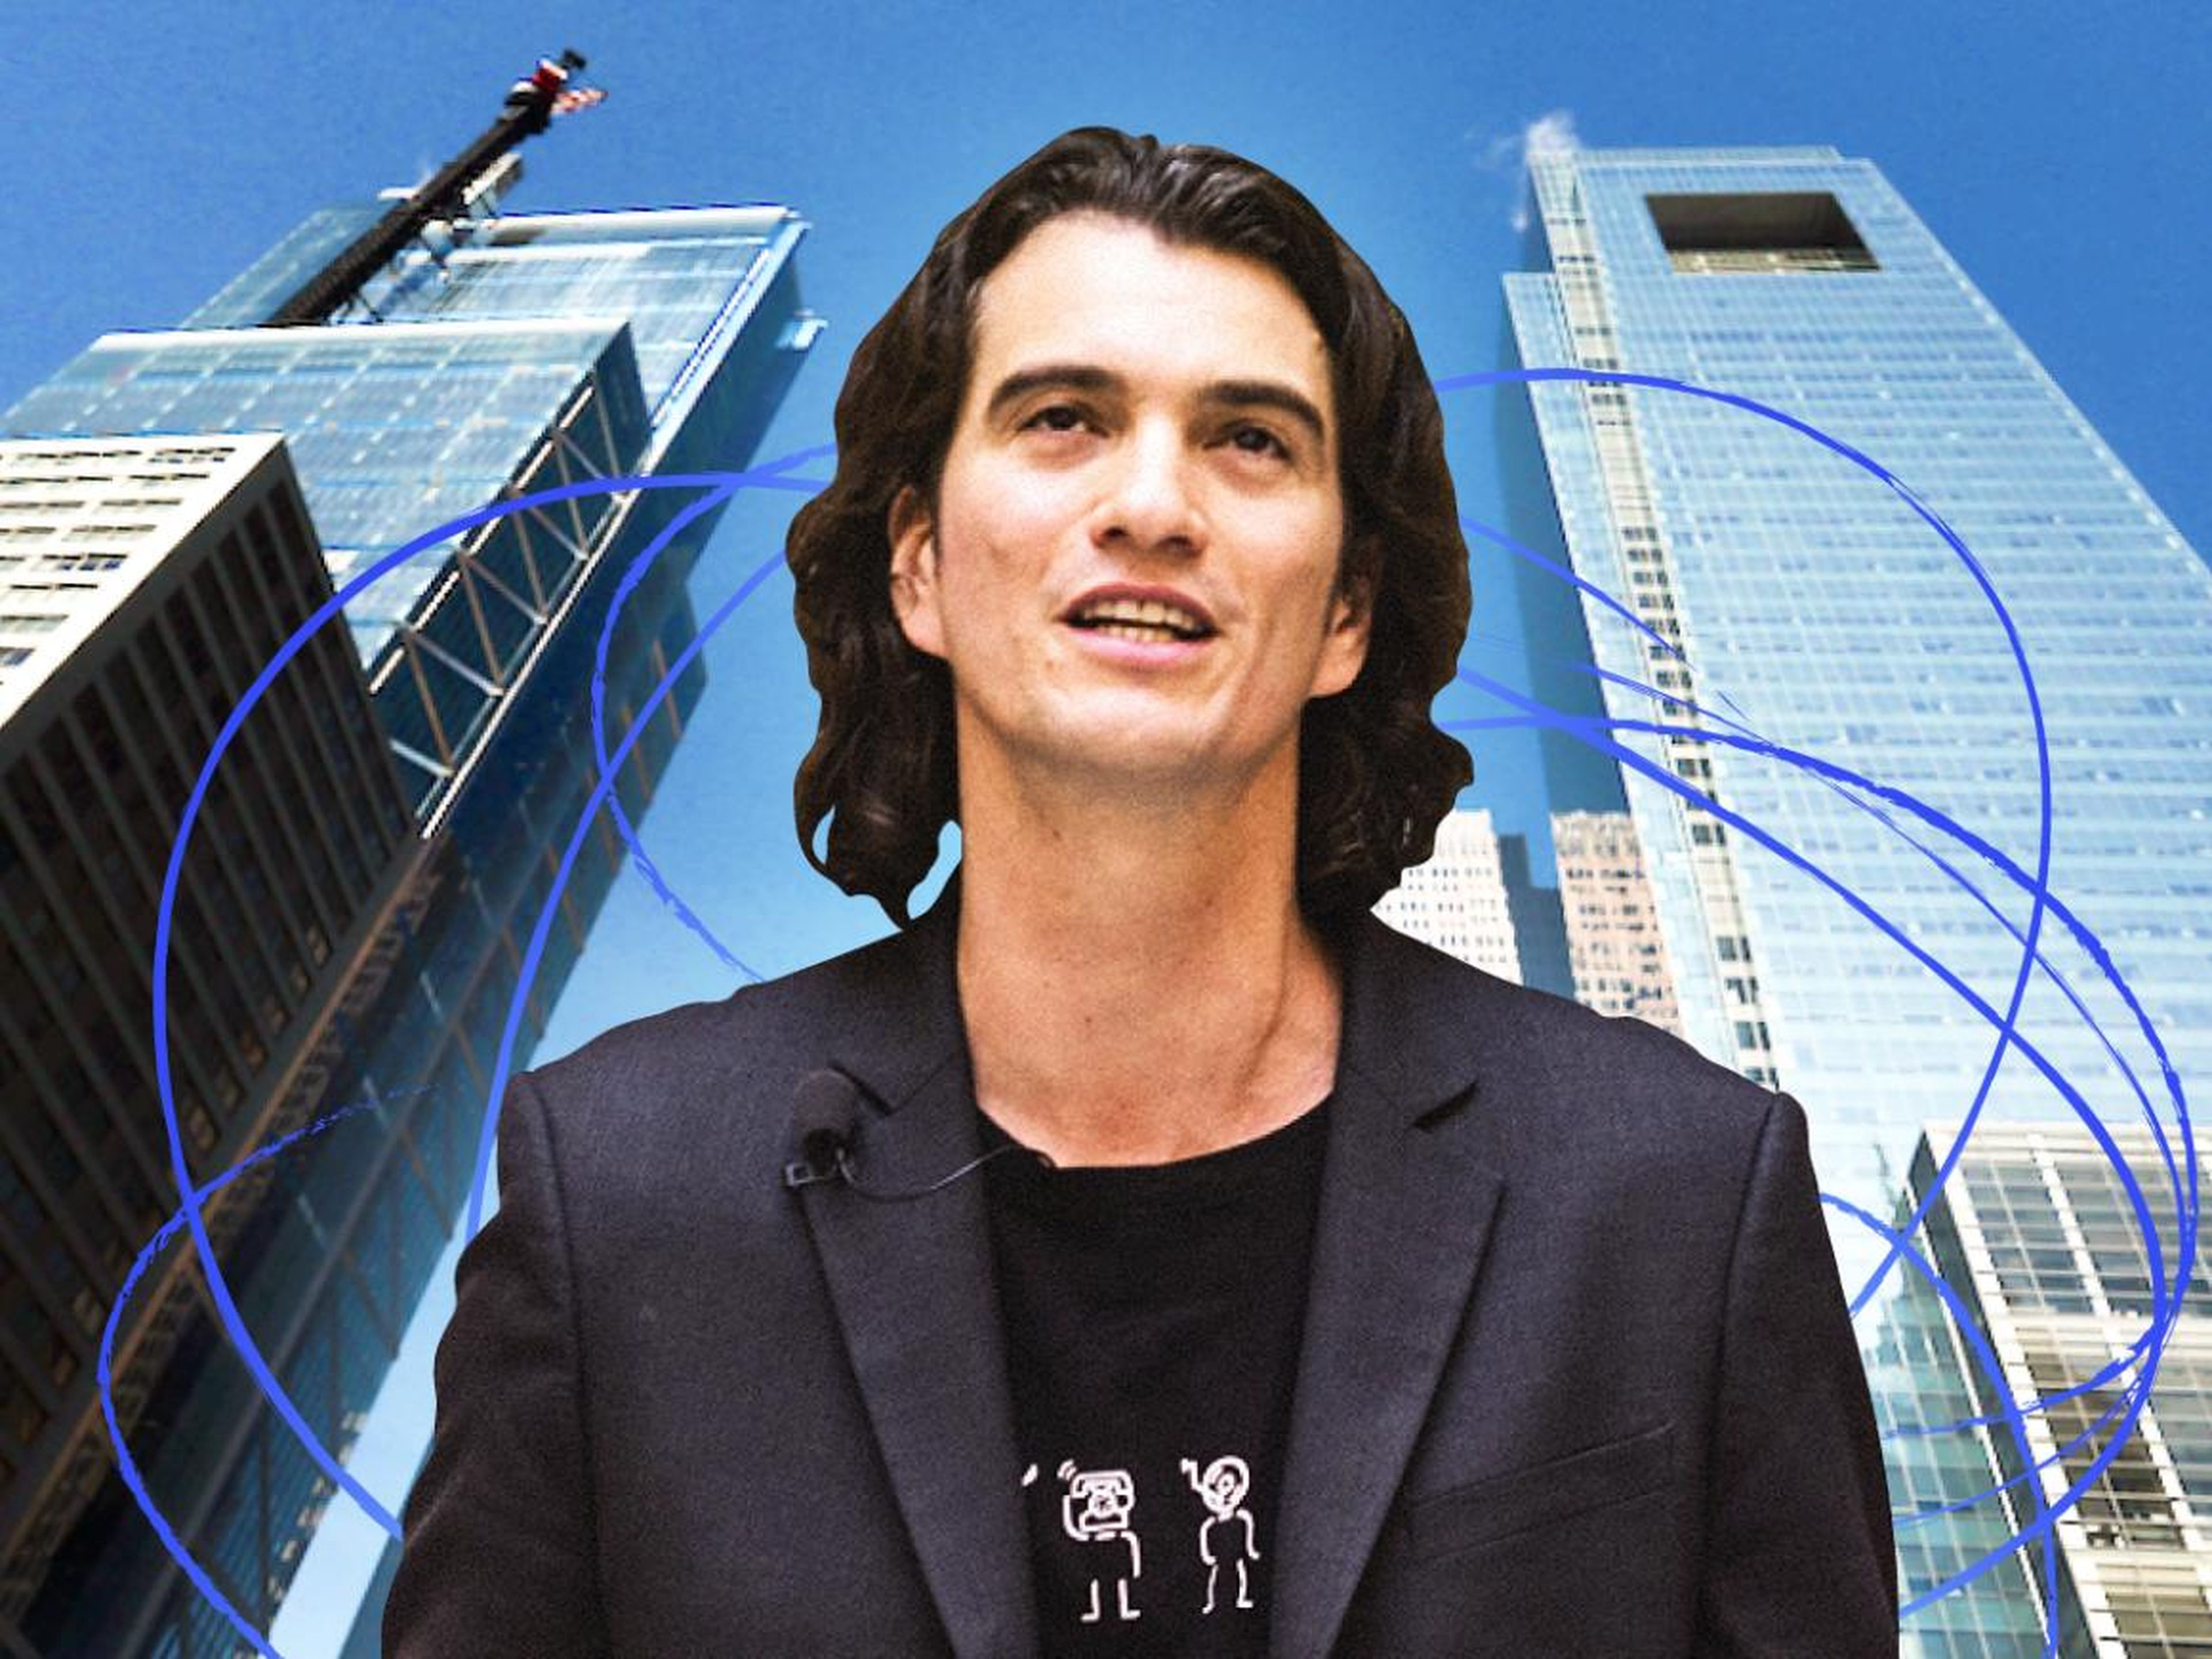 Adam Neumann is stepping down as WeWork's CEO, citing intense public scrutiny that has become a distraction in running the firm.